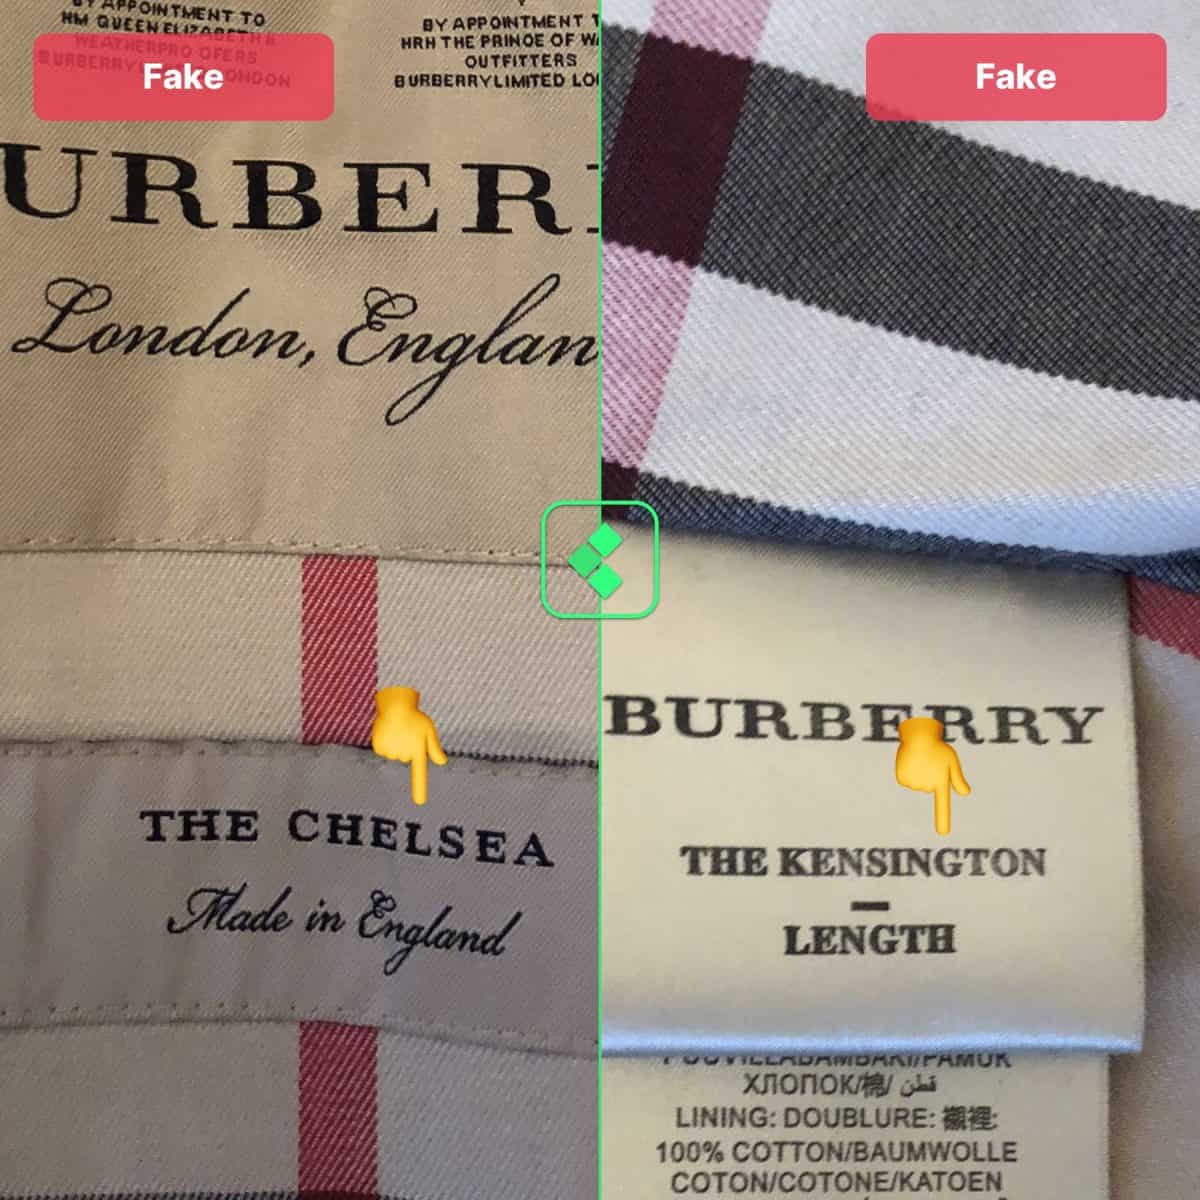 burberry coat authentication guide